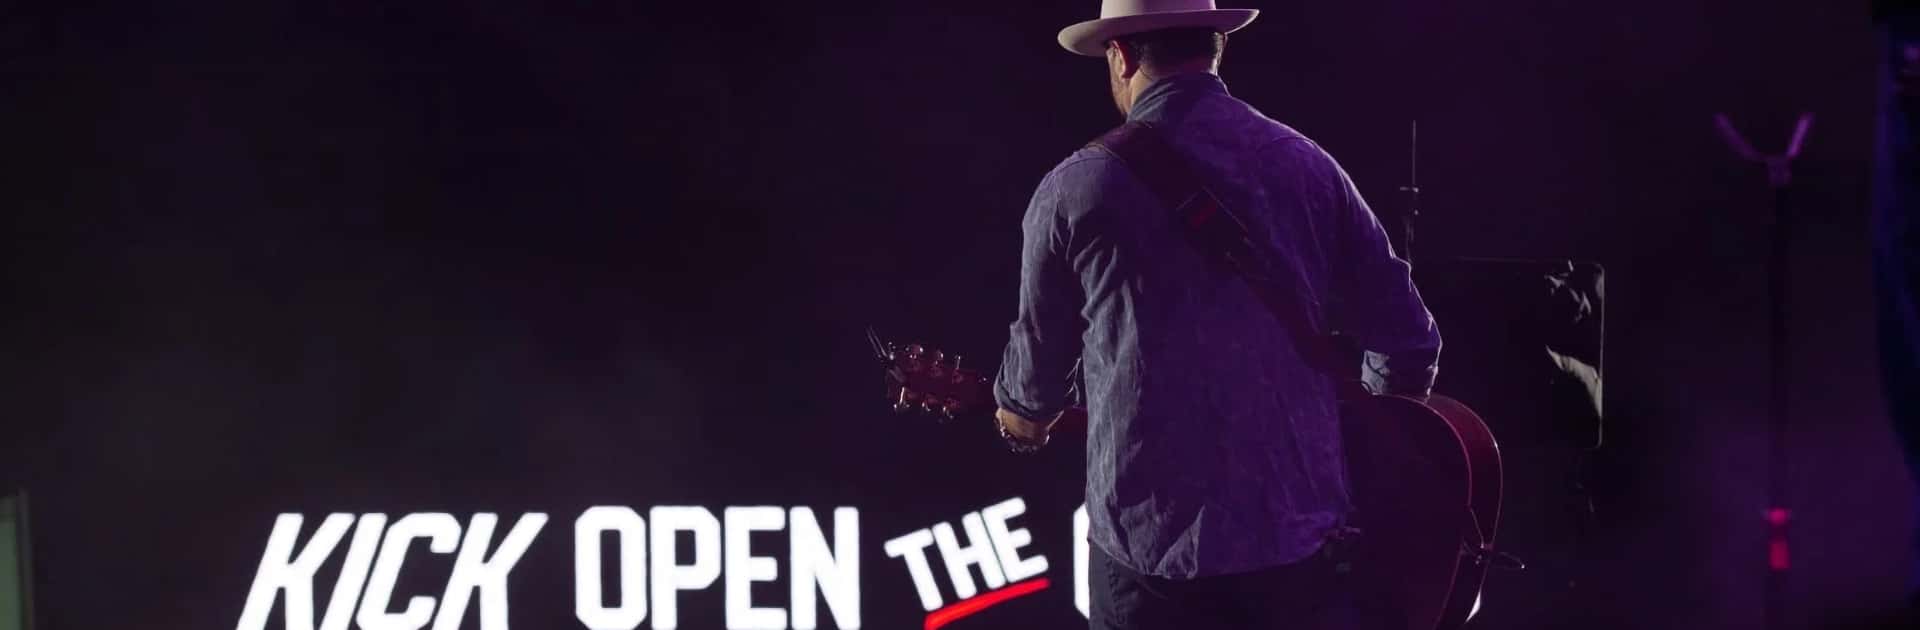 Wade Bowen performing live at Rodeo Austin from the arena floor at Kick Open the Chutes.